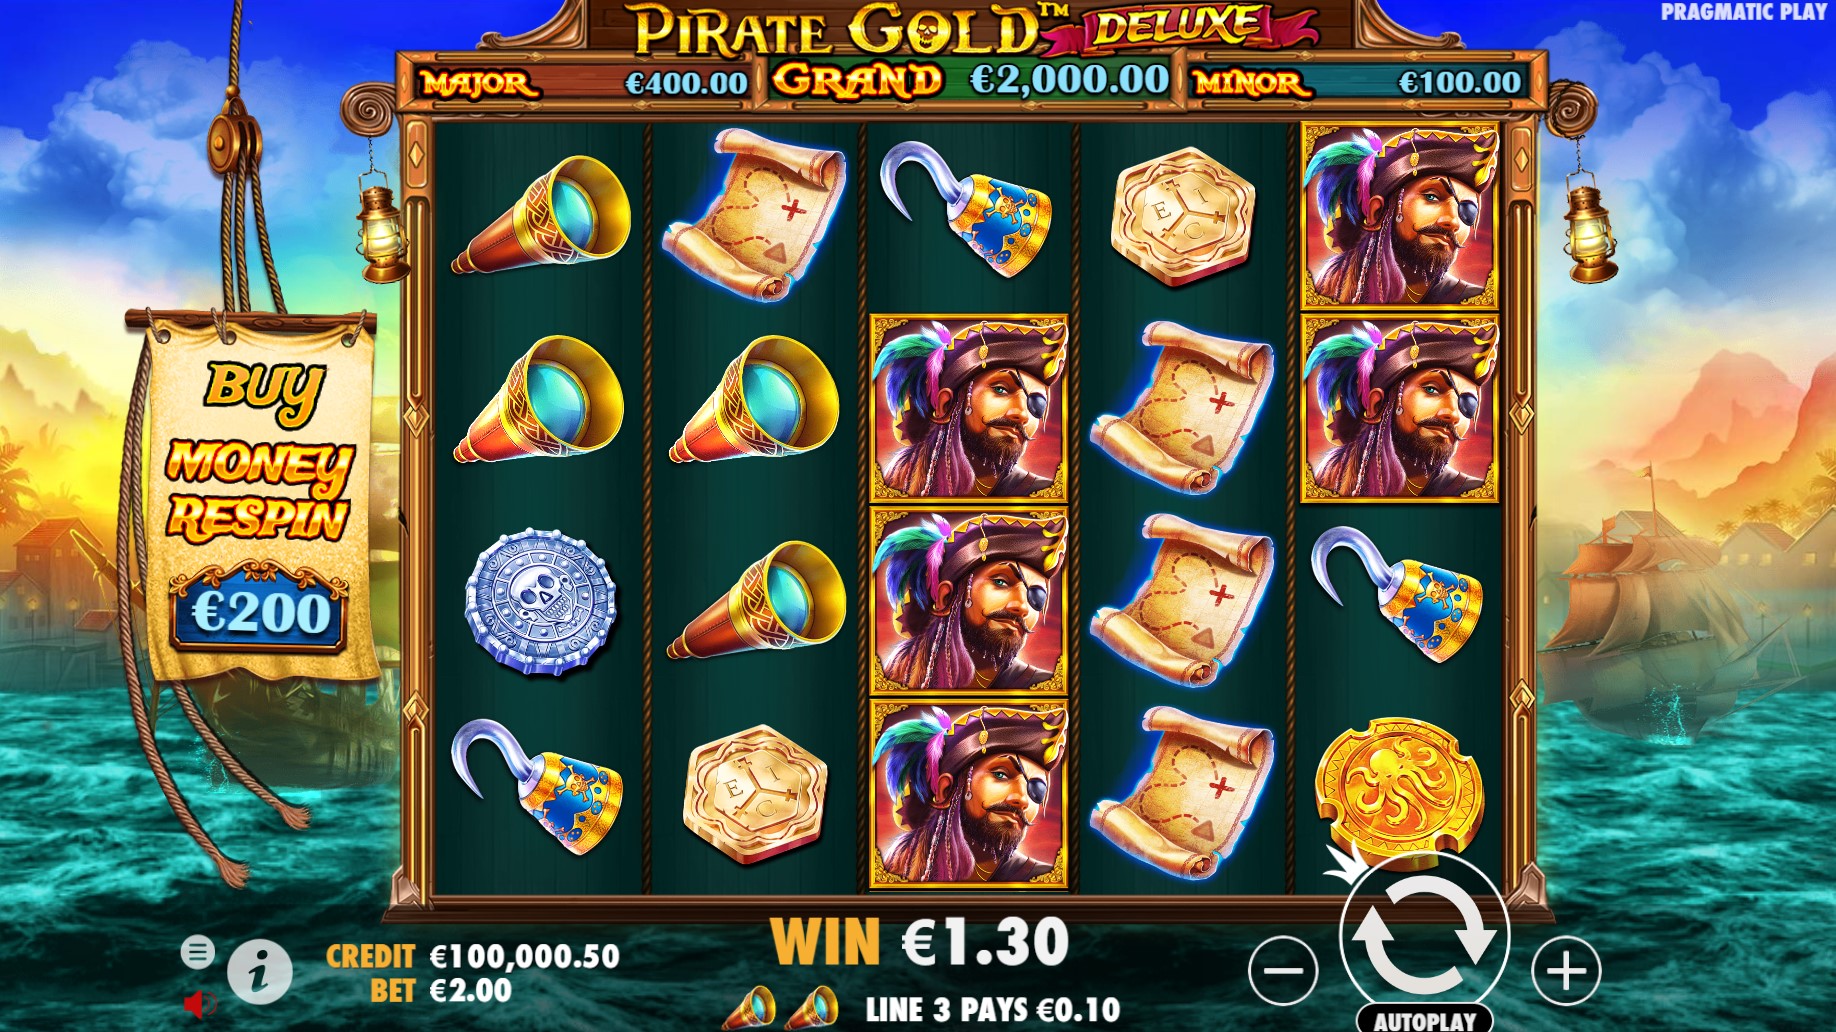 Pirate Gold Deluxe 1 Pragmatic Play